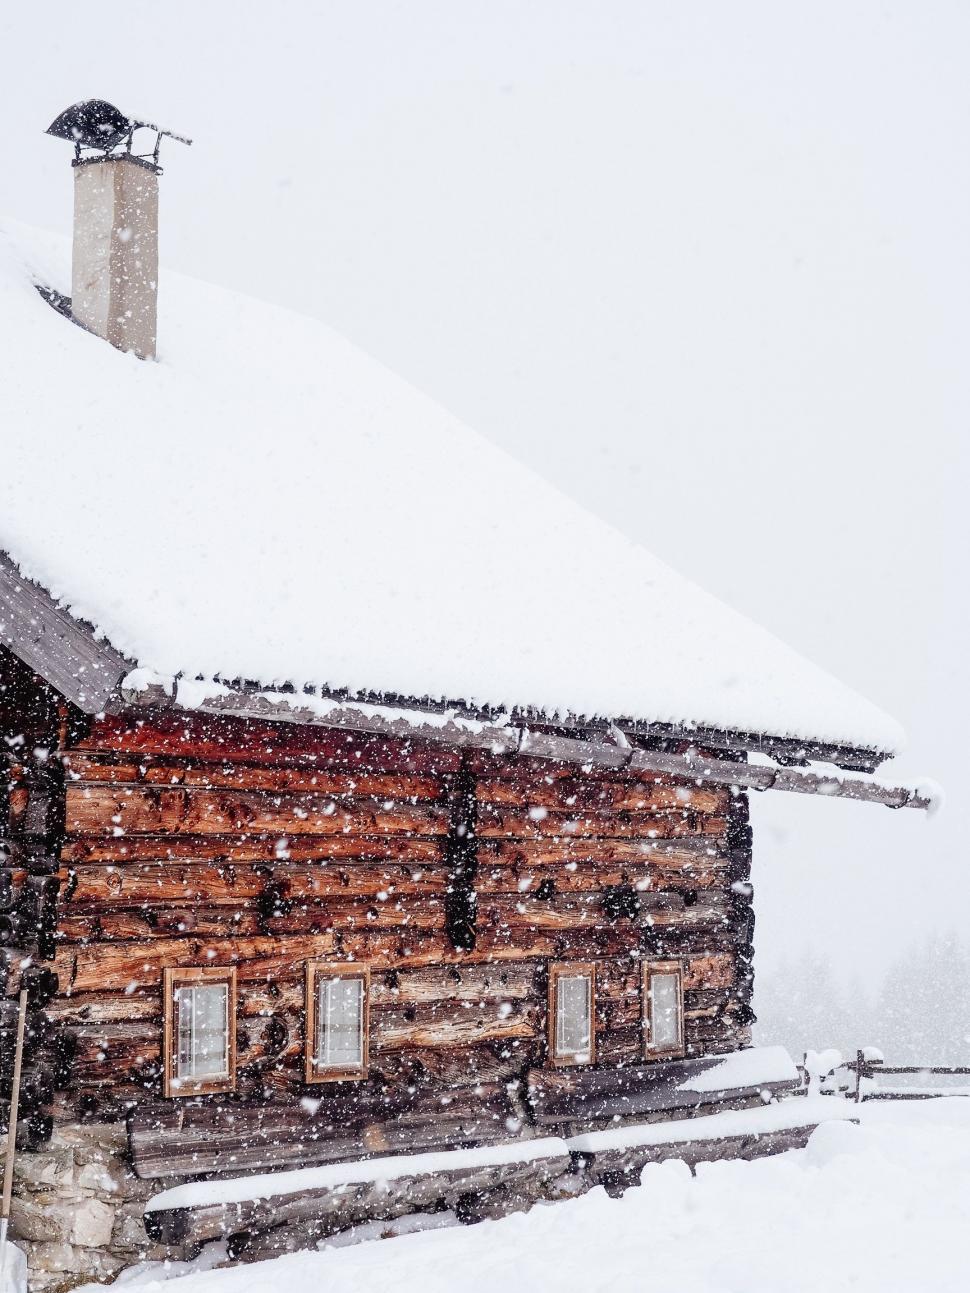 Free Image of Snow-Covered Log Cabin on a Winter Day 